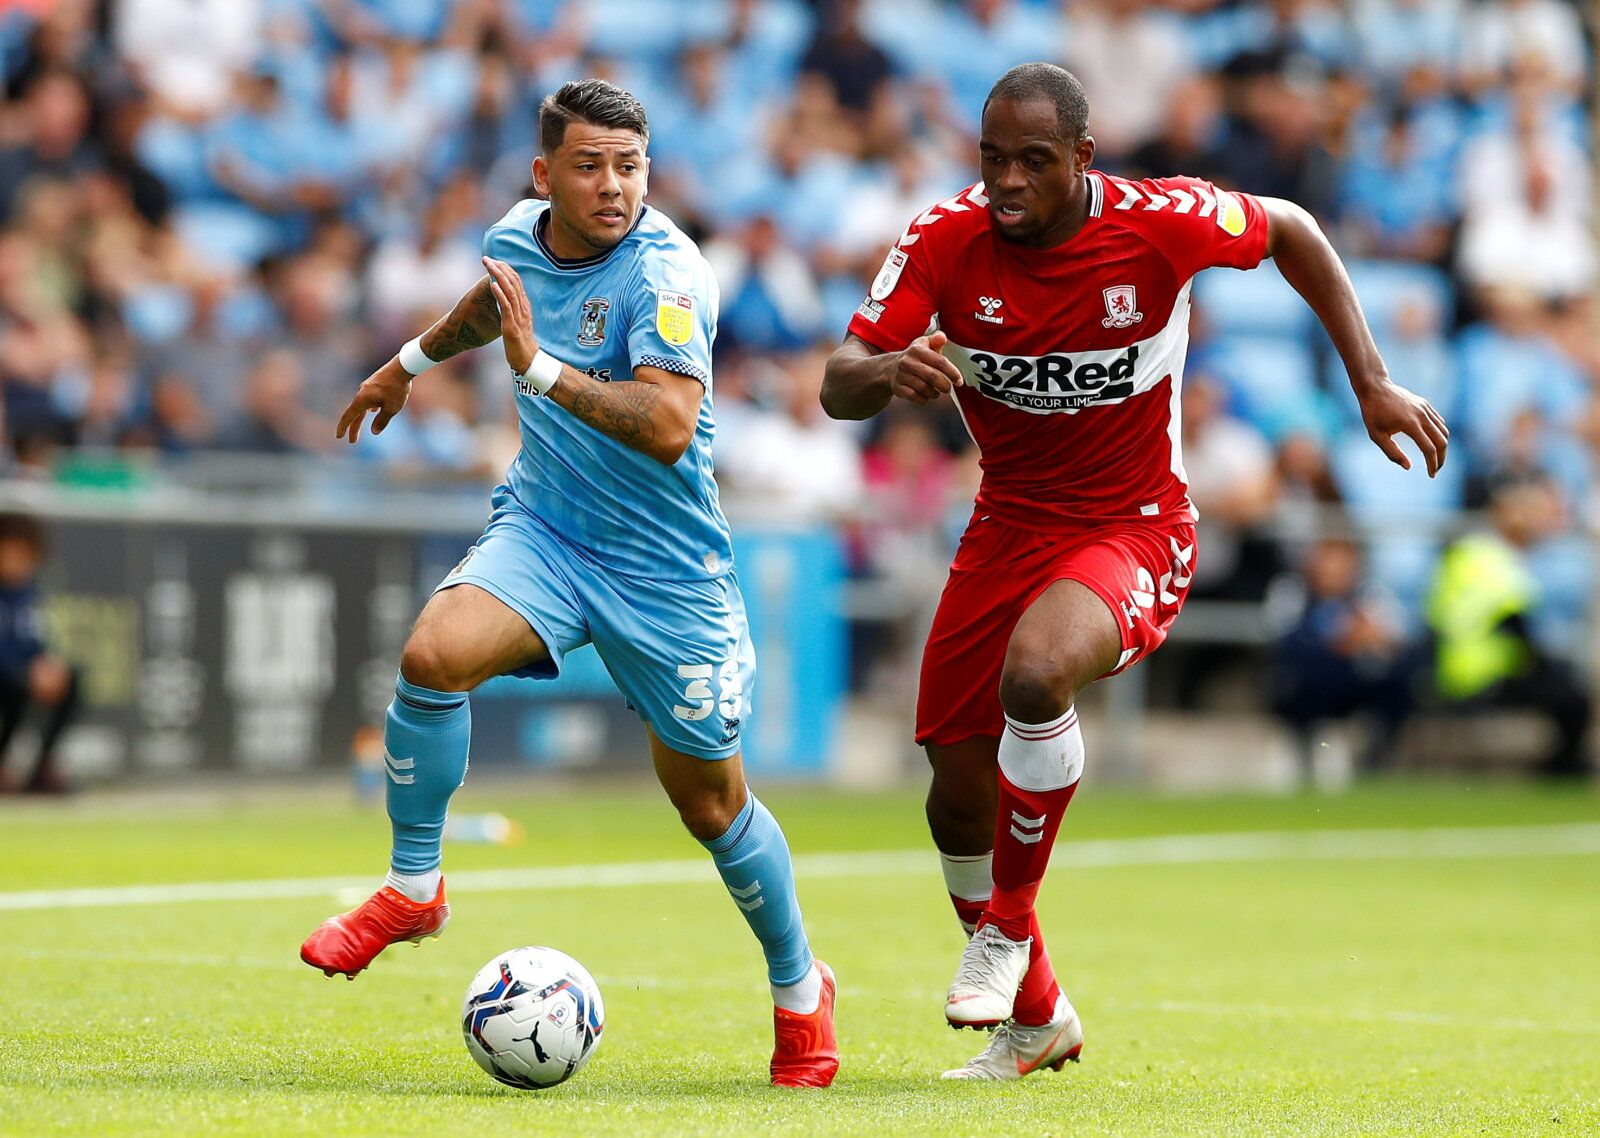 Soccer Football - Championship - Coventry City v Middlesbrough - Coventry Building Society Arena, Coventry, Britain - September 11, 2021  Coventry City's Gustavo Hamer in action with Middlesbrough's Uche Ikpeazu  Action Images/Jason Cairnduff  EDITORIAL USE ONLY. No use with unauthorized audio, video, data, fixture lists, club/league logos or "live" services. Online in-match use limited to 75 images, no video emulation. No use in betting, games or single club/league/player publications.  Please 